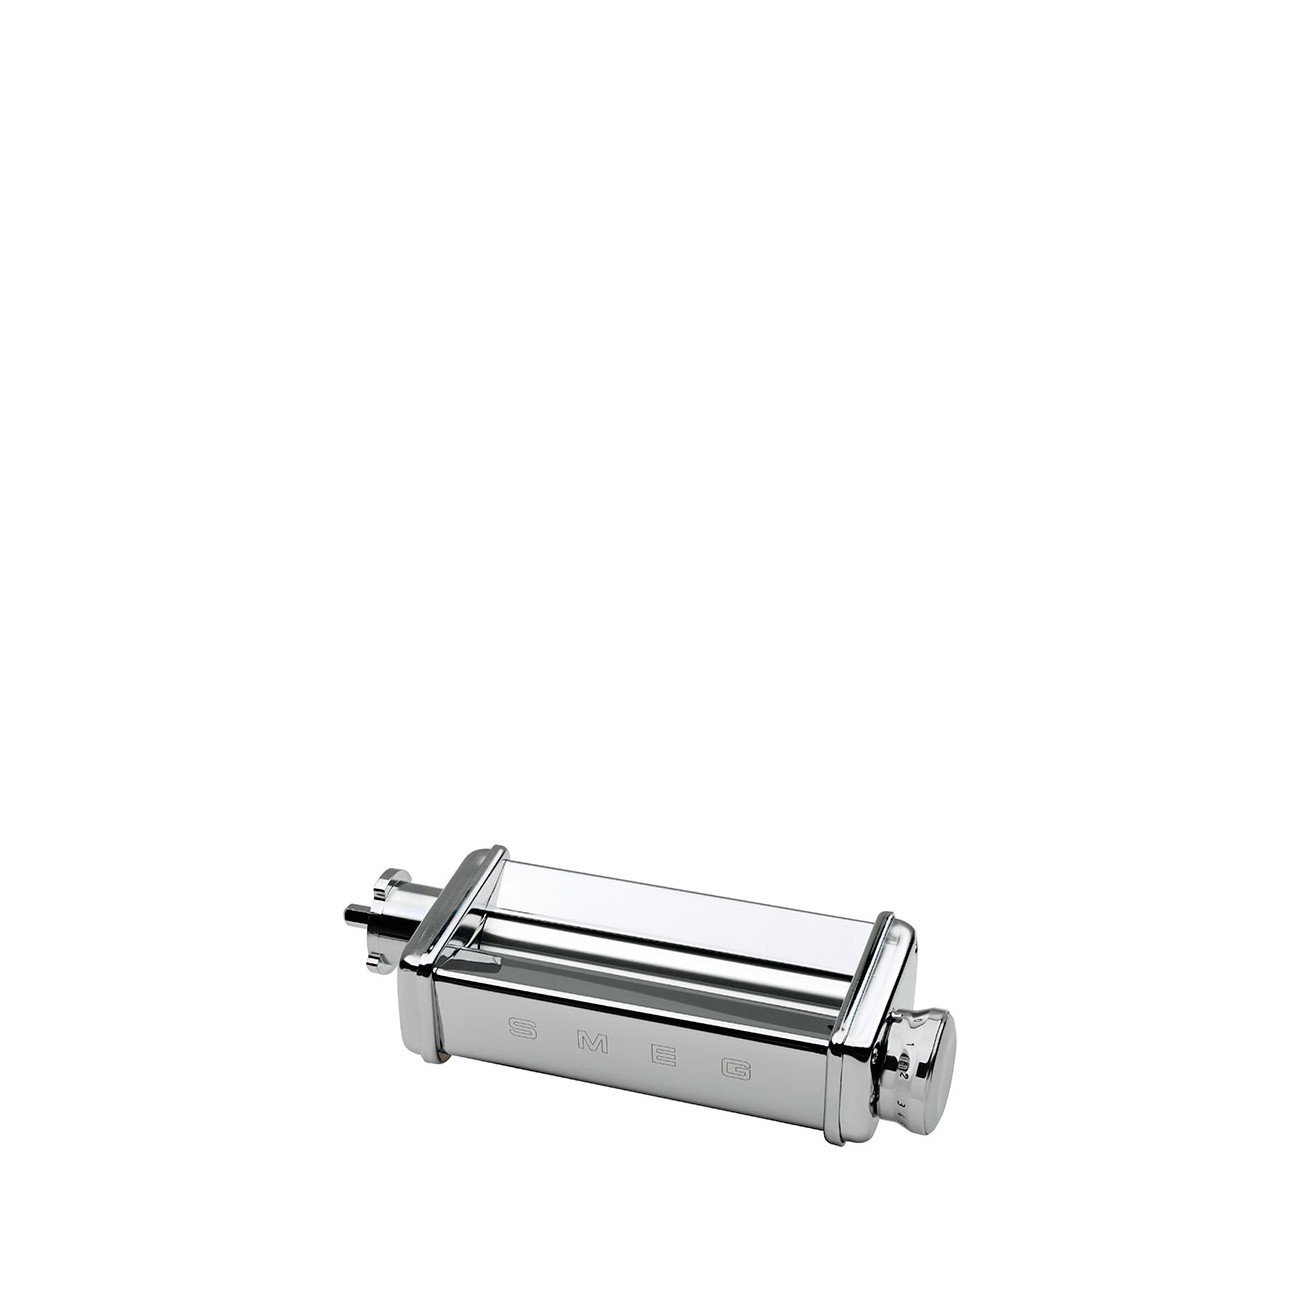 Smeg Accessories for Stand Mixer Pasta Roller